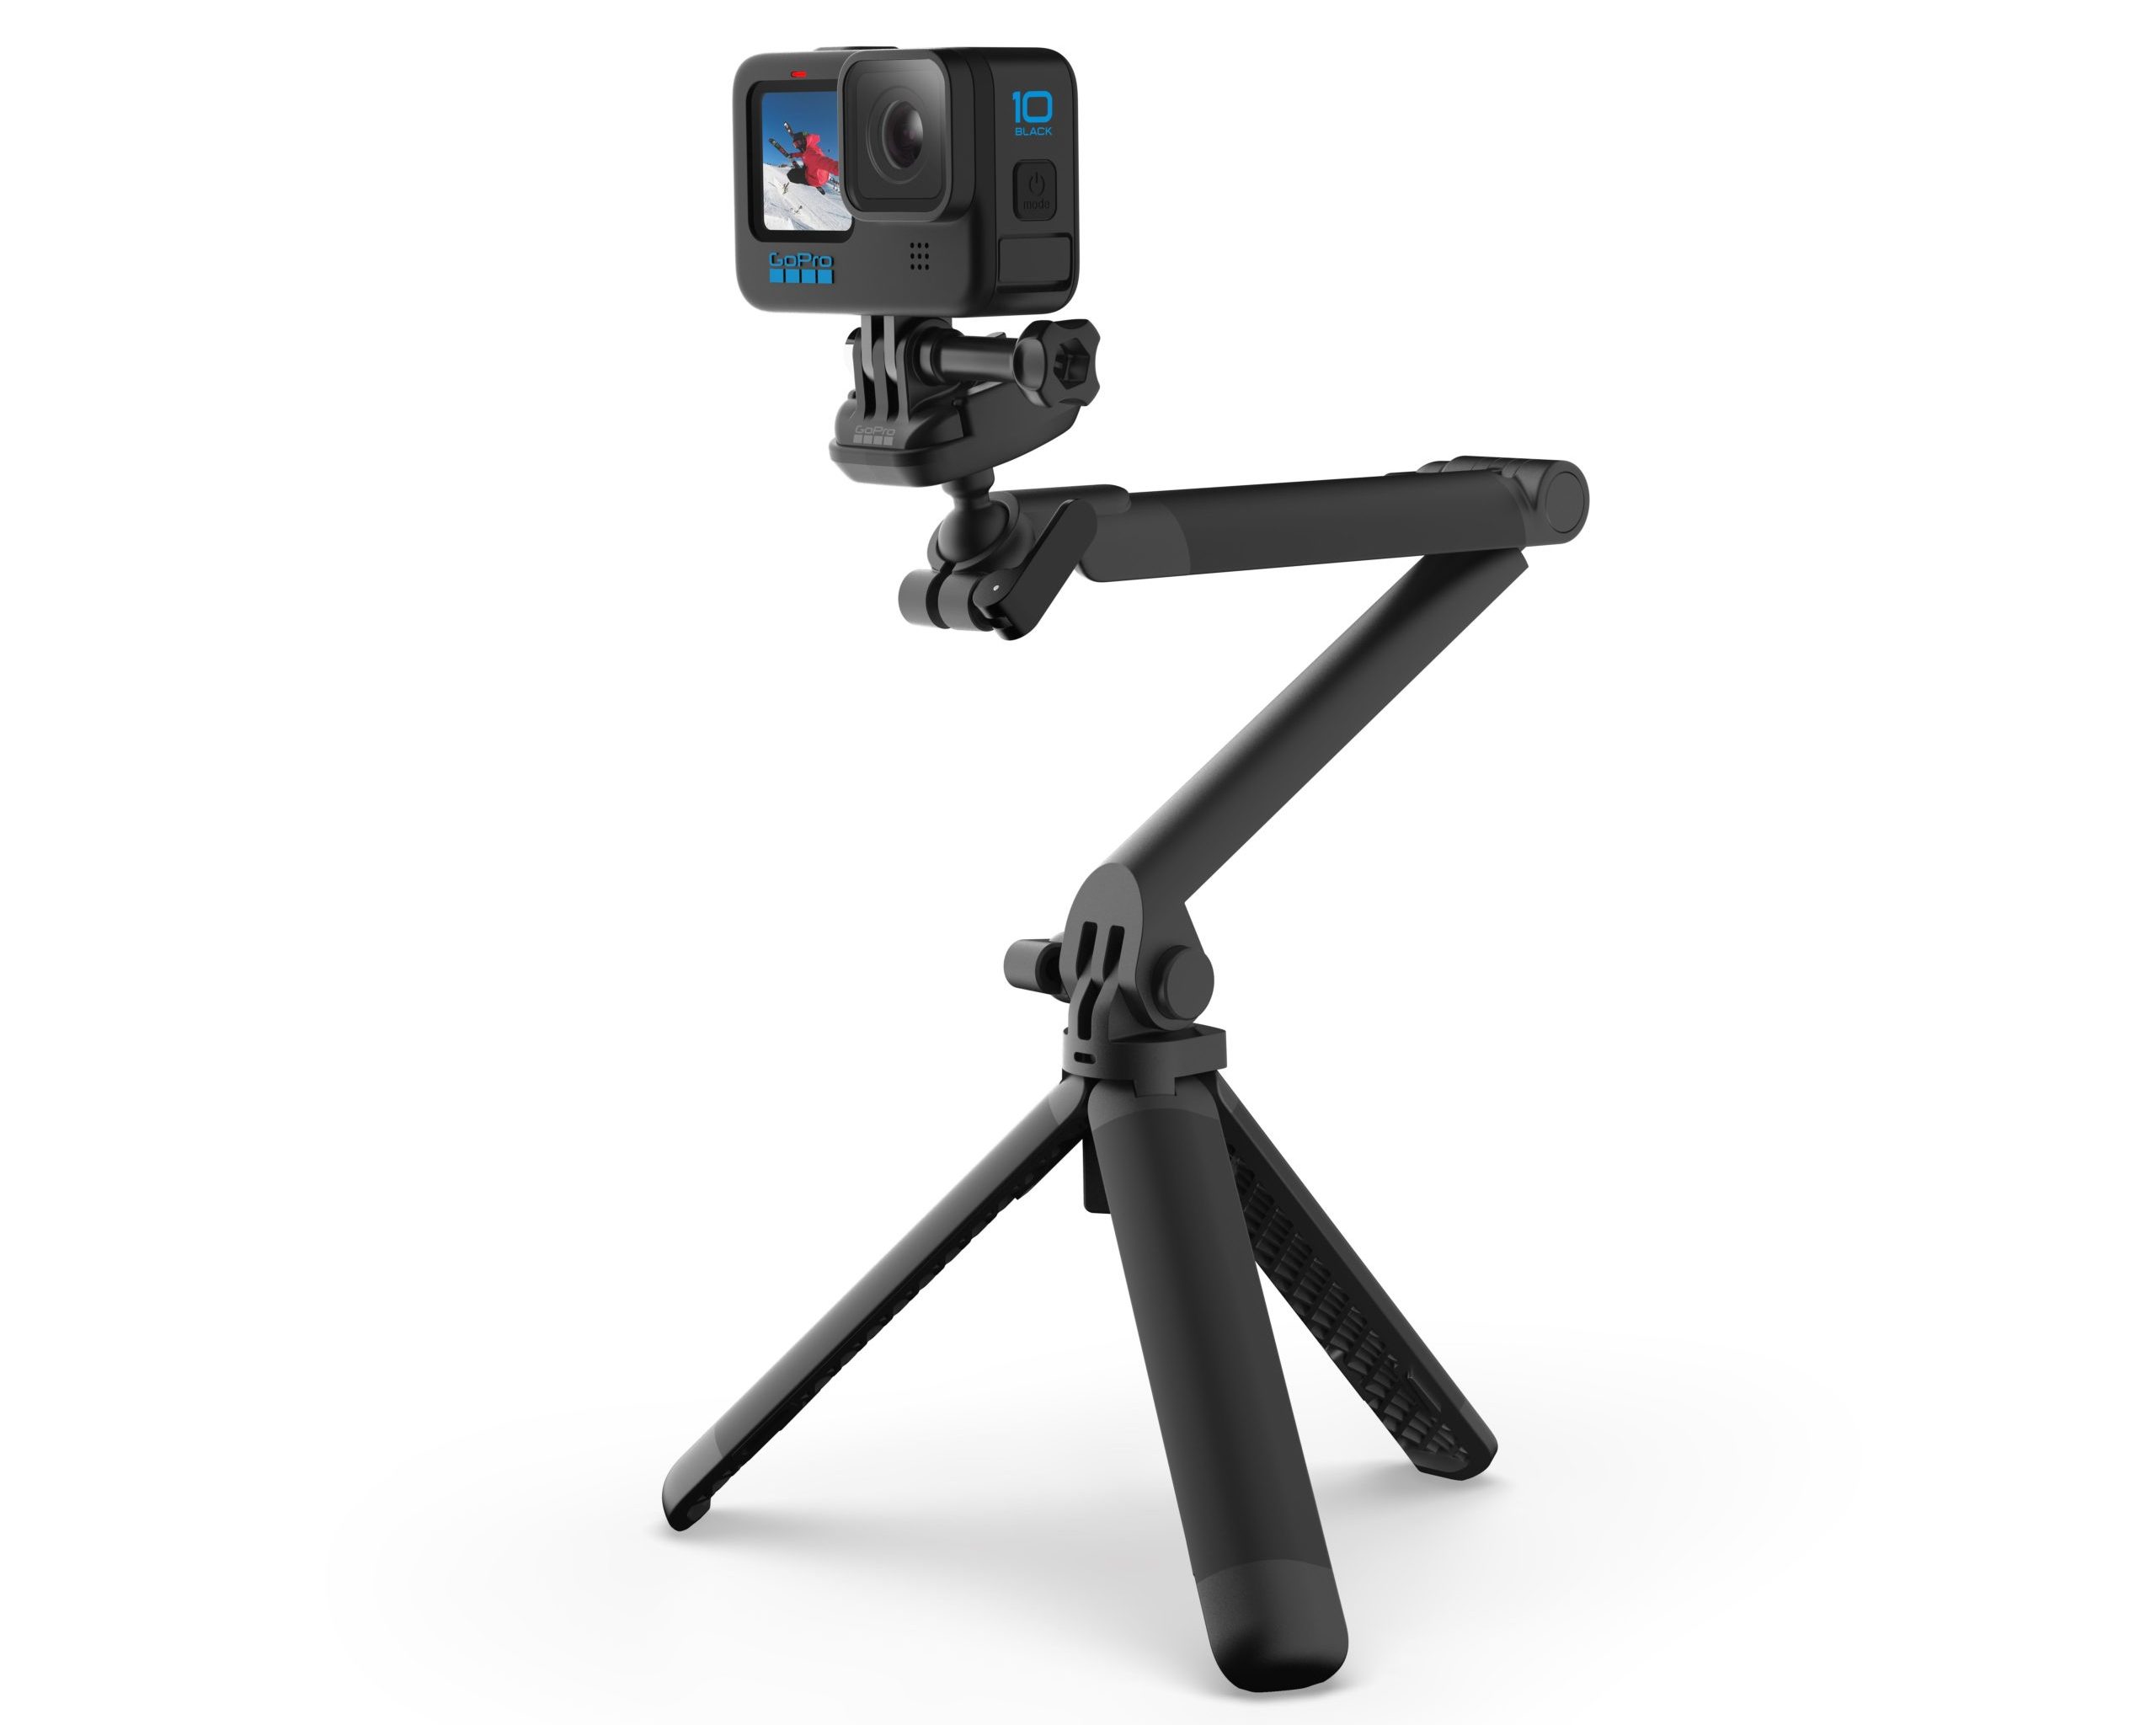 GoPro mount 3 way 2.0 is a tripod with creative angles